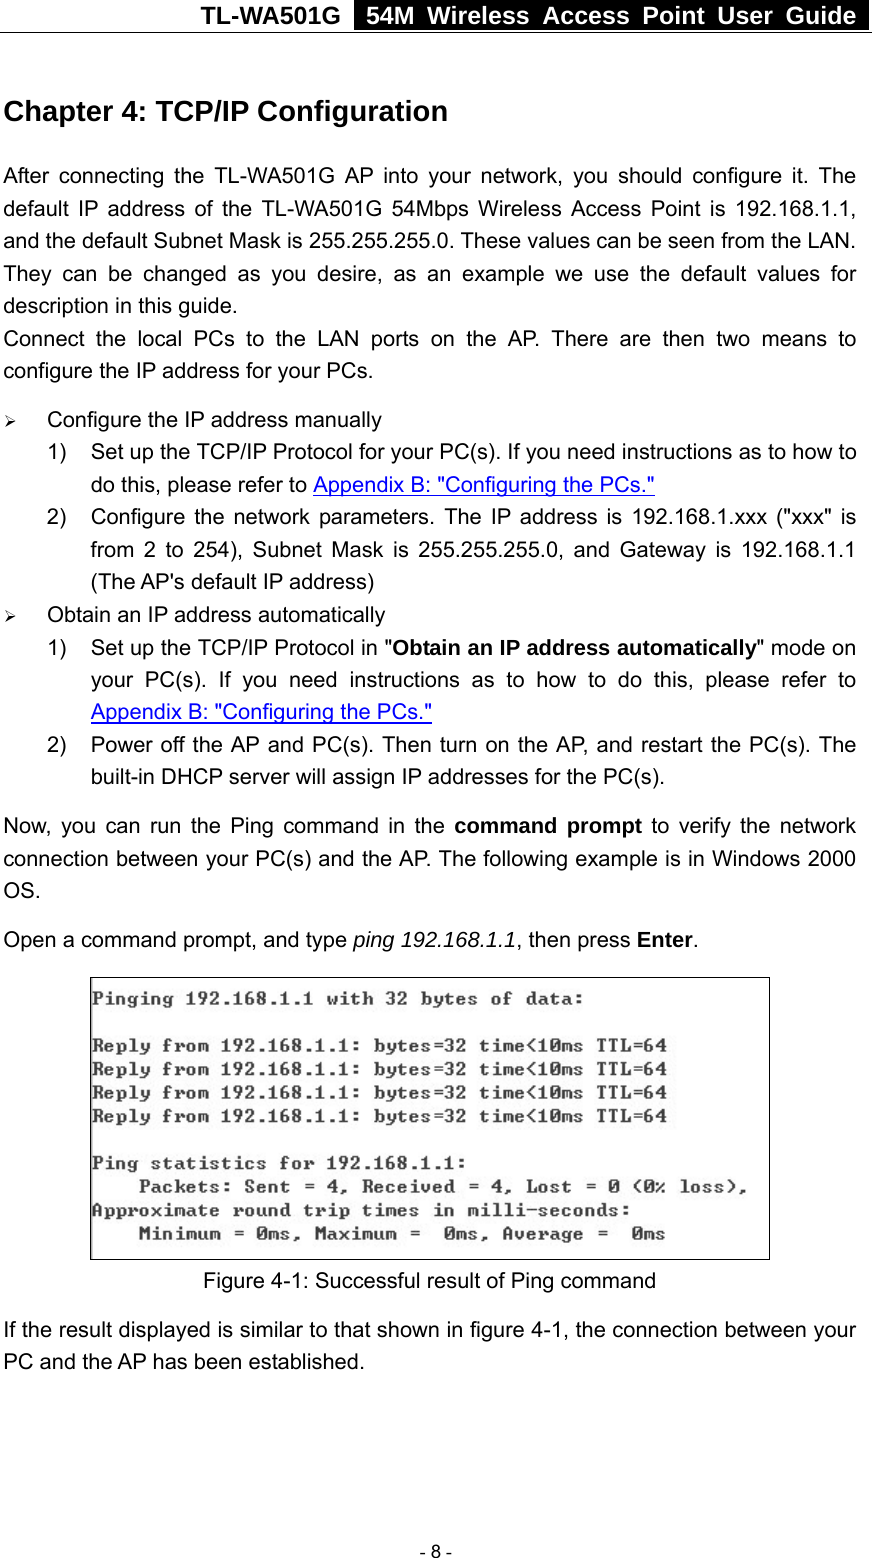 TL-WA501G   54M Wireless Access Point User Guide  Chapter 4: TCP/IP Configuration After connecting the TL-WA501G AP into your network, you should configure it. The default IP address of the TL-WA501G 54Mbps Wireless Access Point is 192.168.1.1, and the default Subnet Mask is 255.255.255.0. These values can be seen from the LAN. They can be changed as you desire, as an example we use the default values for description in this guide. Connect the local PCs to the LAN ports on the AP. There are then two means to configure the IP address for your PCs. ¾ Configure the IP address manually 1)  Set up the TCP/IP Protocol for your PC(s). If you need instructions as to how to do this, please refer to Appendix B: &quot;Configuring the PCs.&quot; 2)  Configure the network parameters. The IP address is 192.168.1.xxx (&quot;xxx&quot; is from 2 to 254), Subnet Mask is 255.255.255.0, and Gateway is 192.168.1.1 (The AP&apos;s default IP address) ¾ Obtain an IP address automatically 1)  Set up the TCP/IP Protocol in &quot;Obtain an IP address automatically&quot; mode on your PC(s). If you need instructions as to how to do this, please refer to Appendix B: &quot;Configuring the PCs.&quot; 2)  Power off the AP and PC(s). Then turn on the AP, and restart the PC(s). The built-in DHCP server will assign IP addresses for the PC(s). Now, you can run the Ping command in the command prompt to verify the network connection between your PC(s) and the AP. The following example is in Windows 2000 OS. Open a command prompt, and type ping 192.168.1.1, then press Enter.  Figure 4-1: Successful result of Ping command If the result displayed is similar to that shown in figure 4-1, the connection between your PC and the AP has been established.    - 8 - 